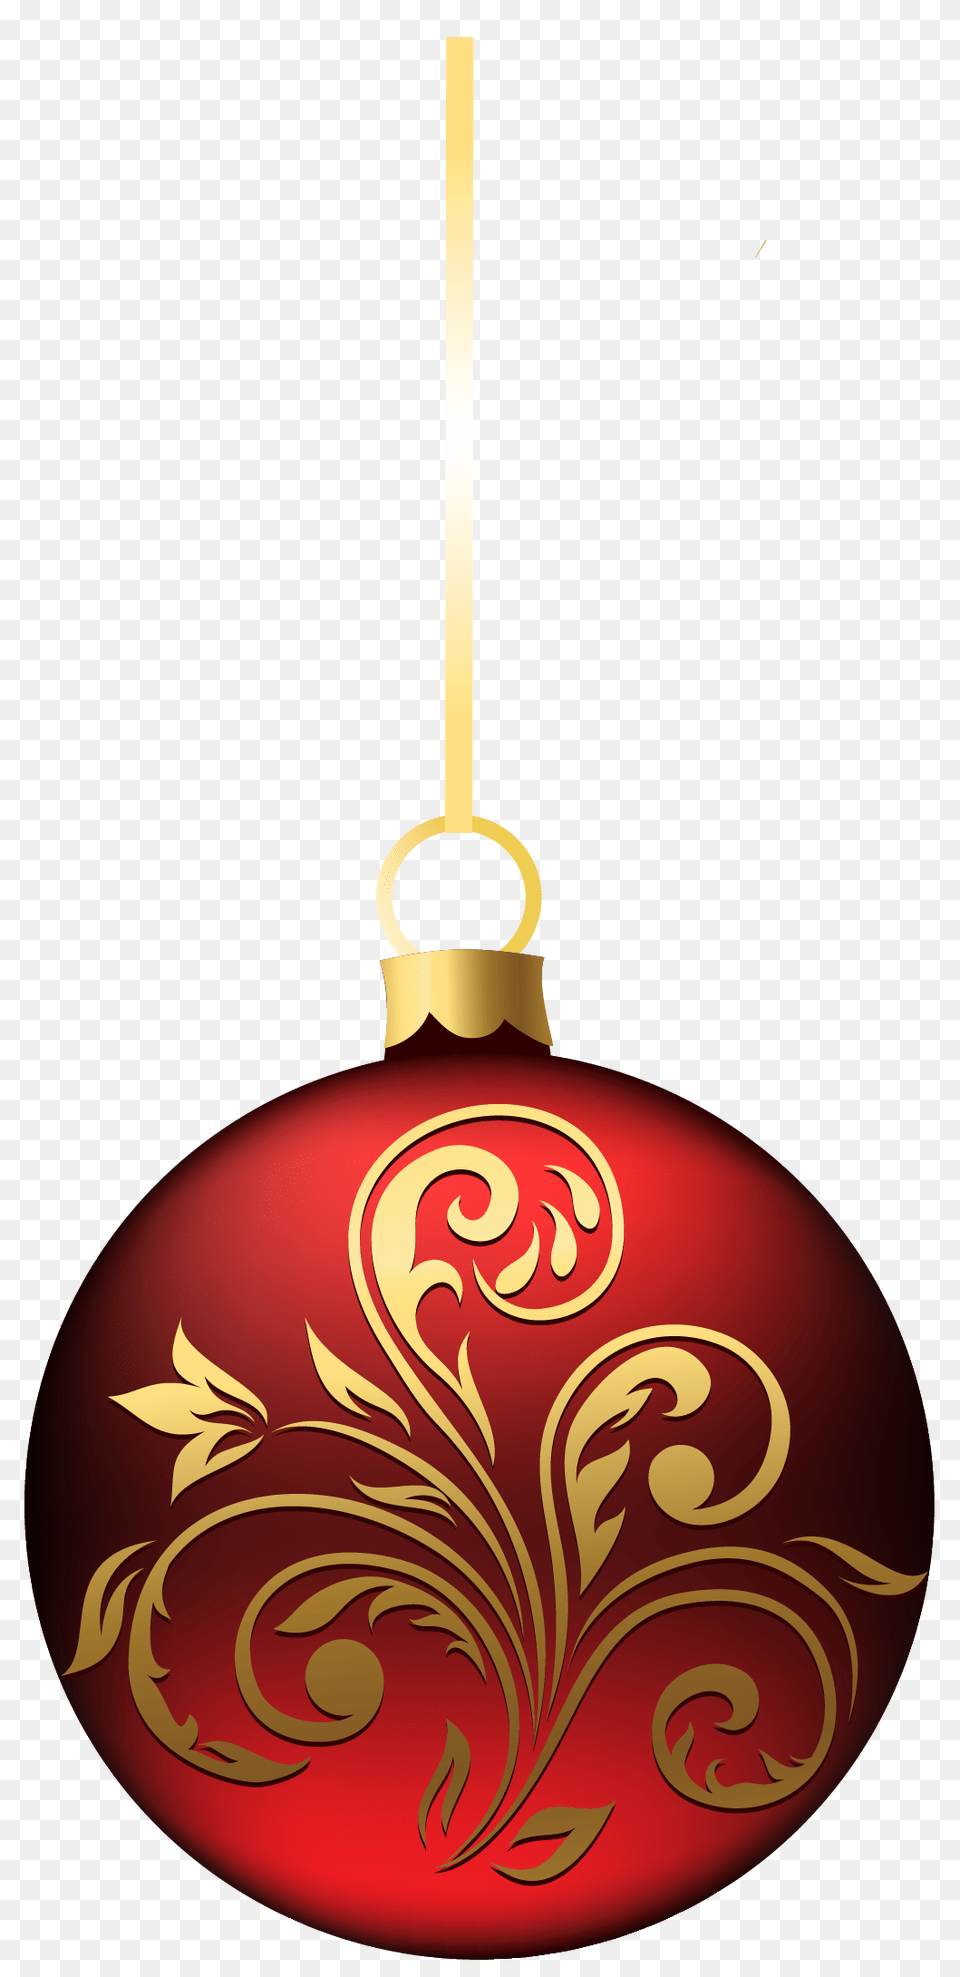 Awesome Christmas Bulb Ornament Clipart Christmas Background Christmas Ornament, Accessories, Smoke Pipe Png